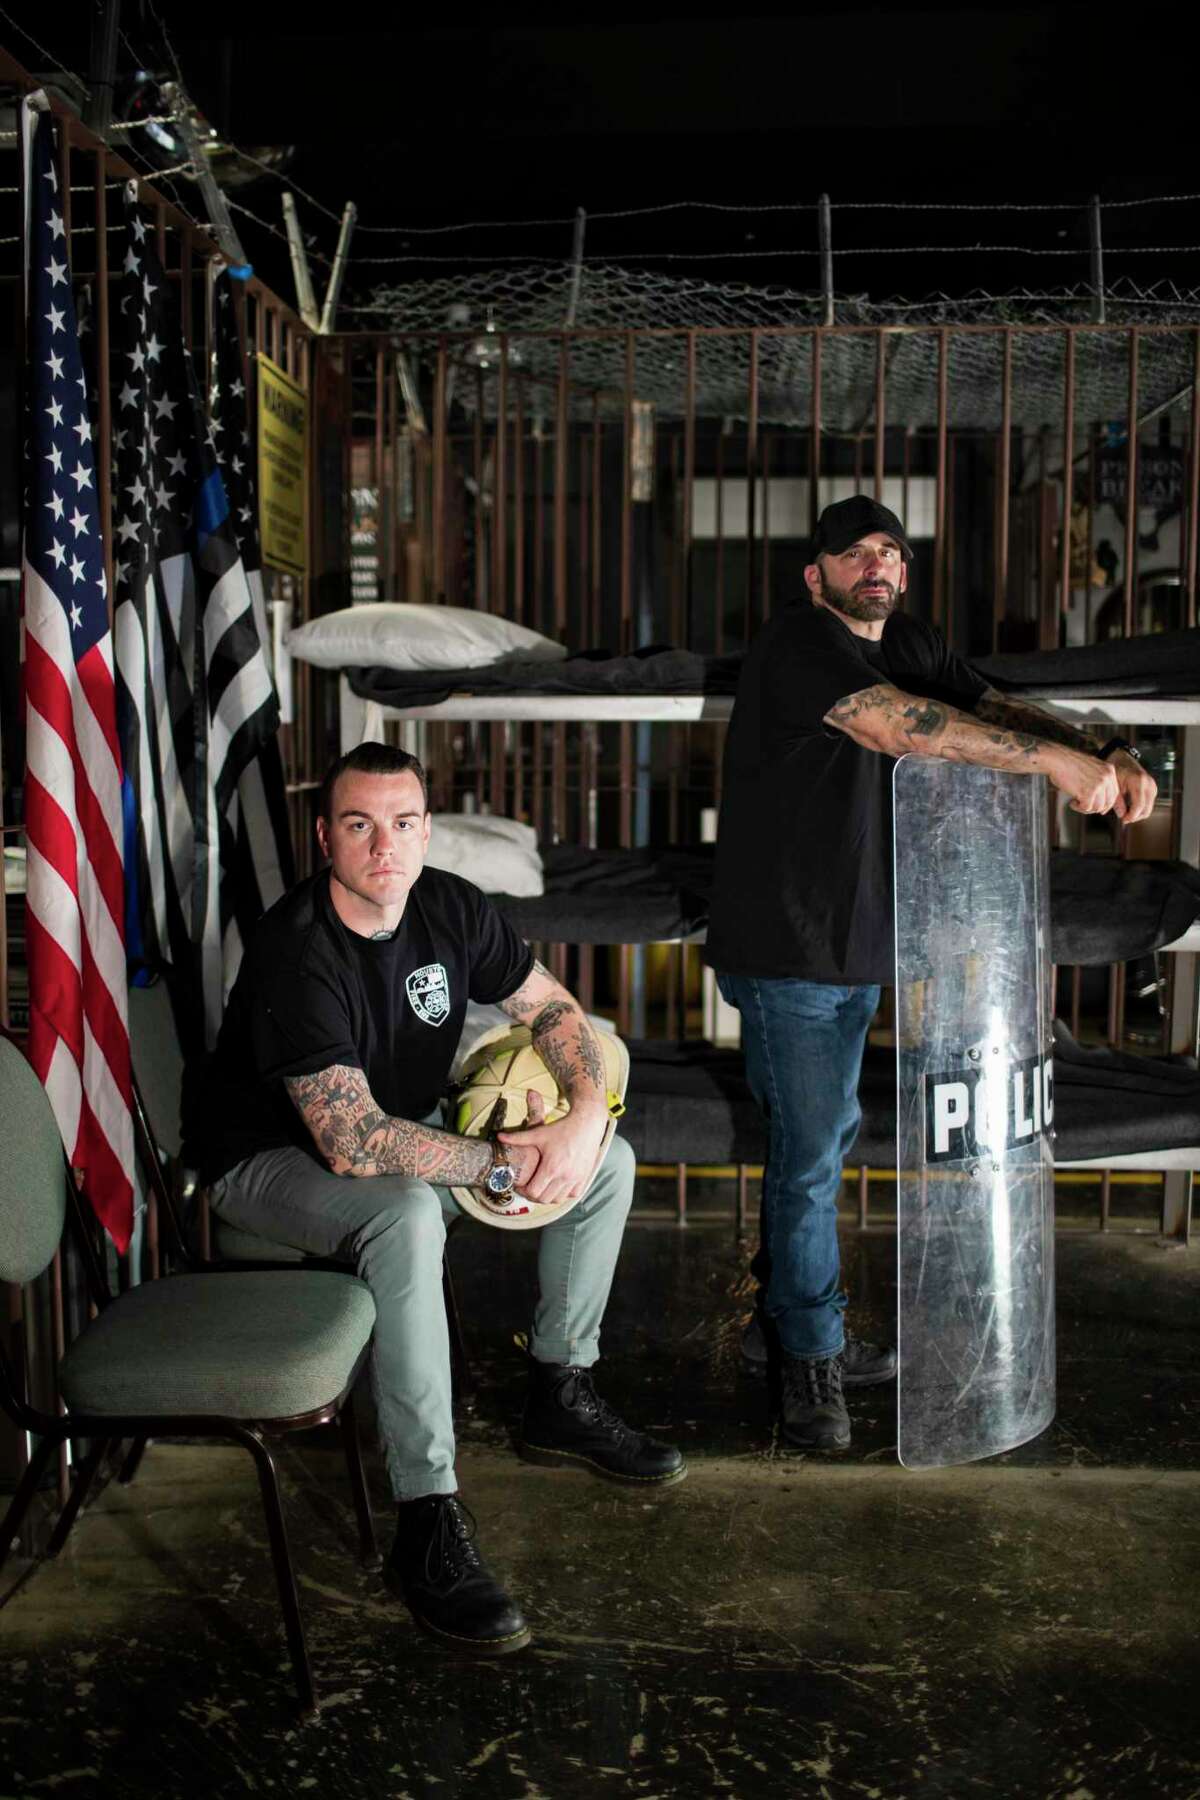 Robbie Carson and BK Klev of Prison Break Tattoos are not inking customers during the pandemic. Instead, they are organizing donation drives for first responders.